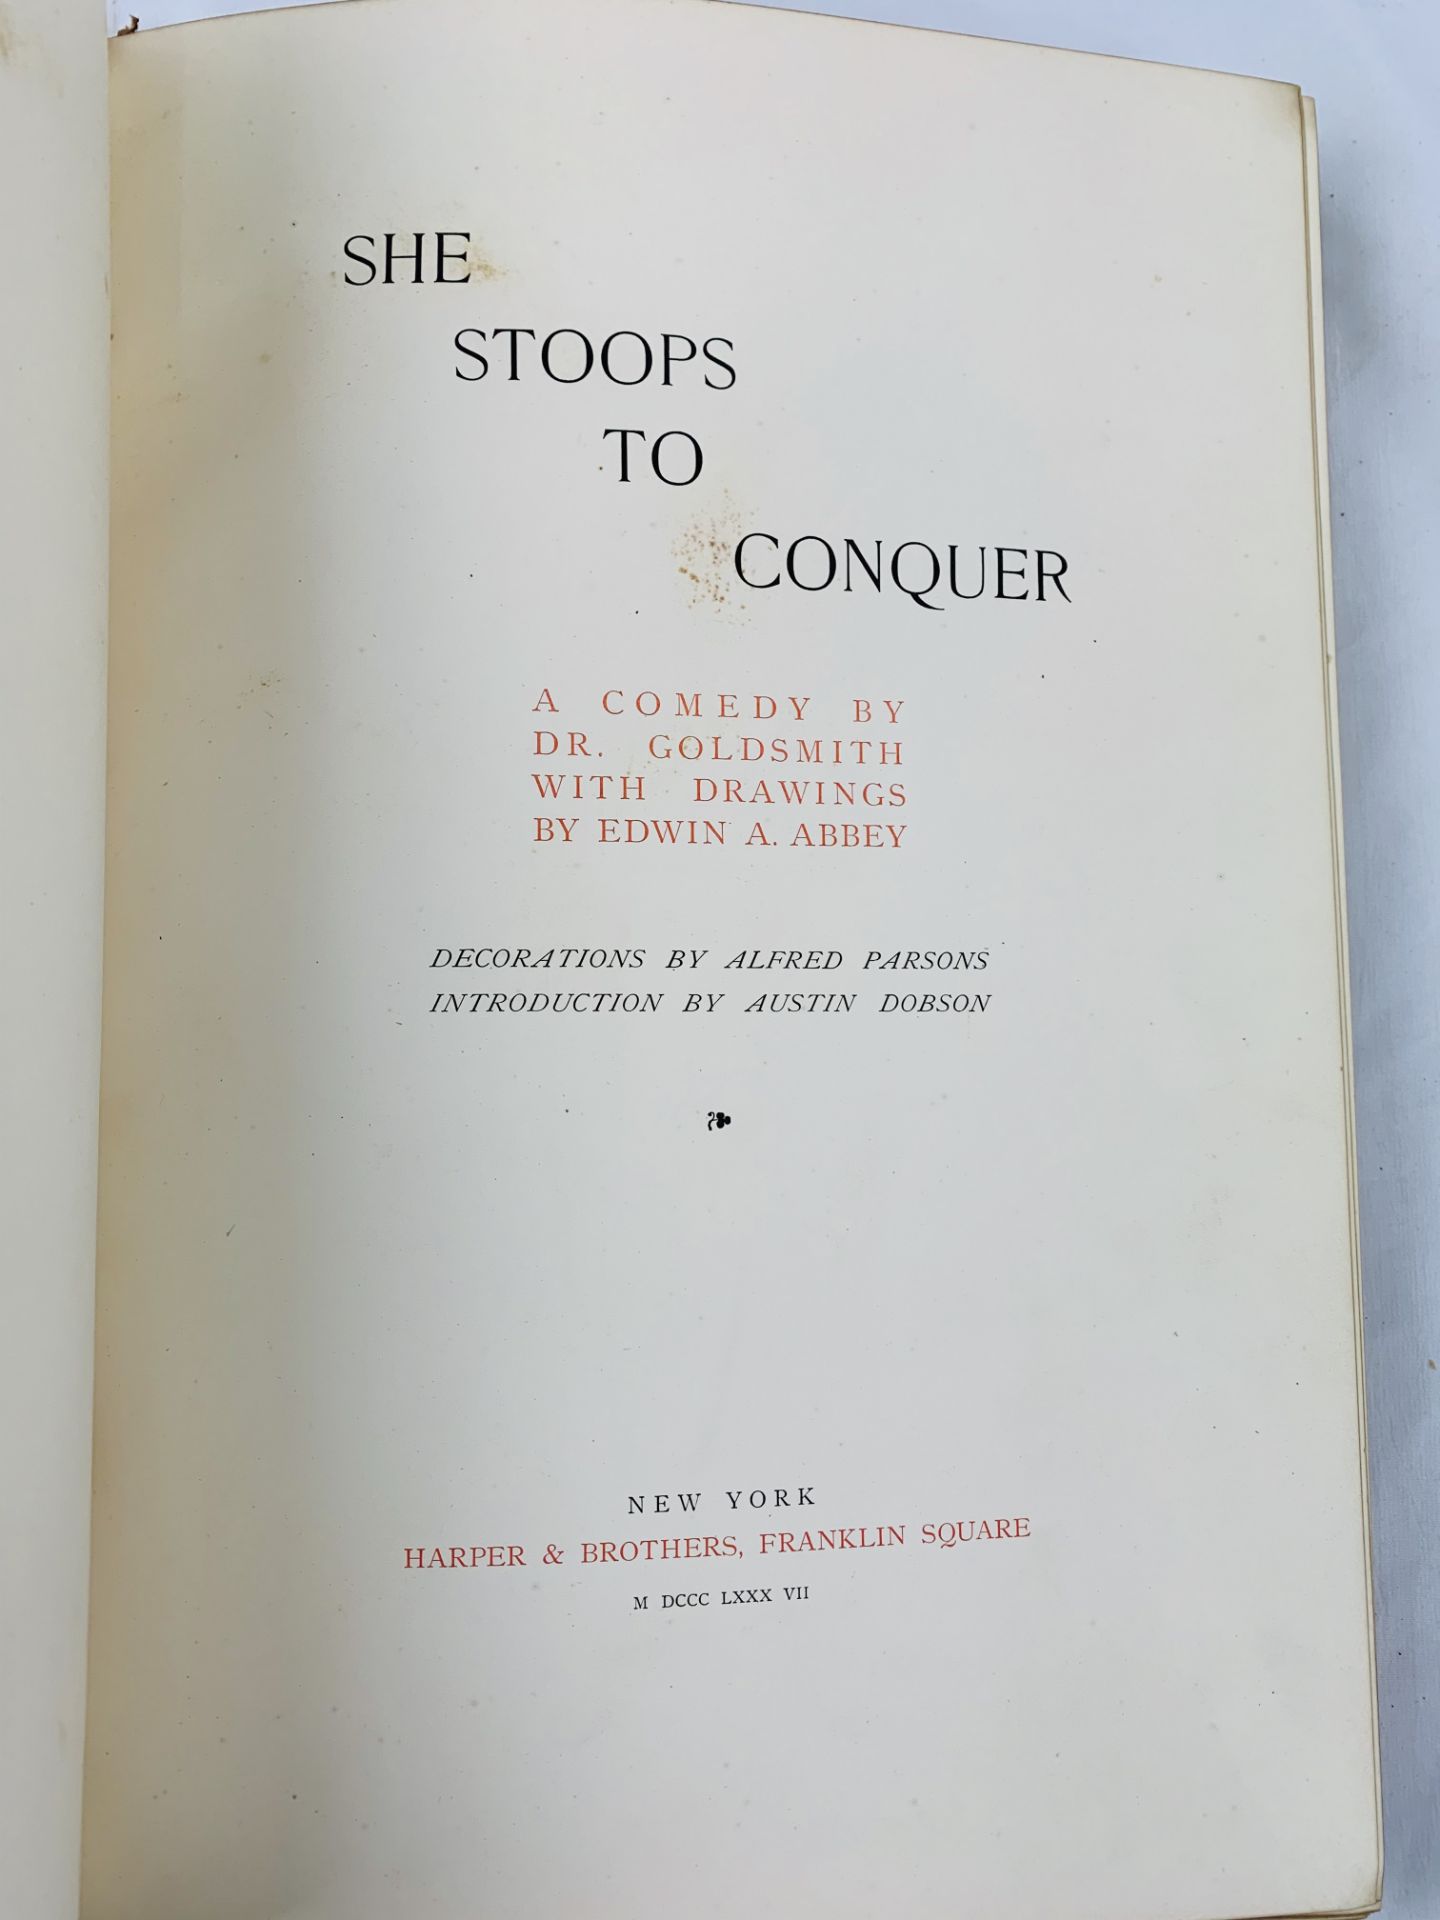 She Stoops to Conquer by Oliver Goldsmith, 1887. - Image 3 of 4